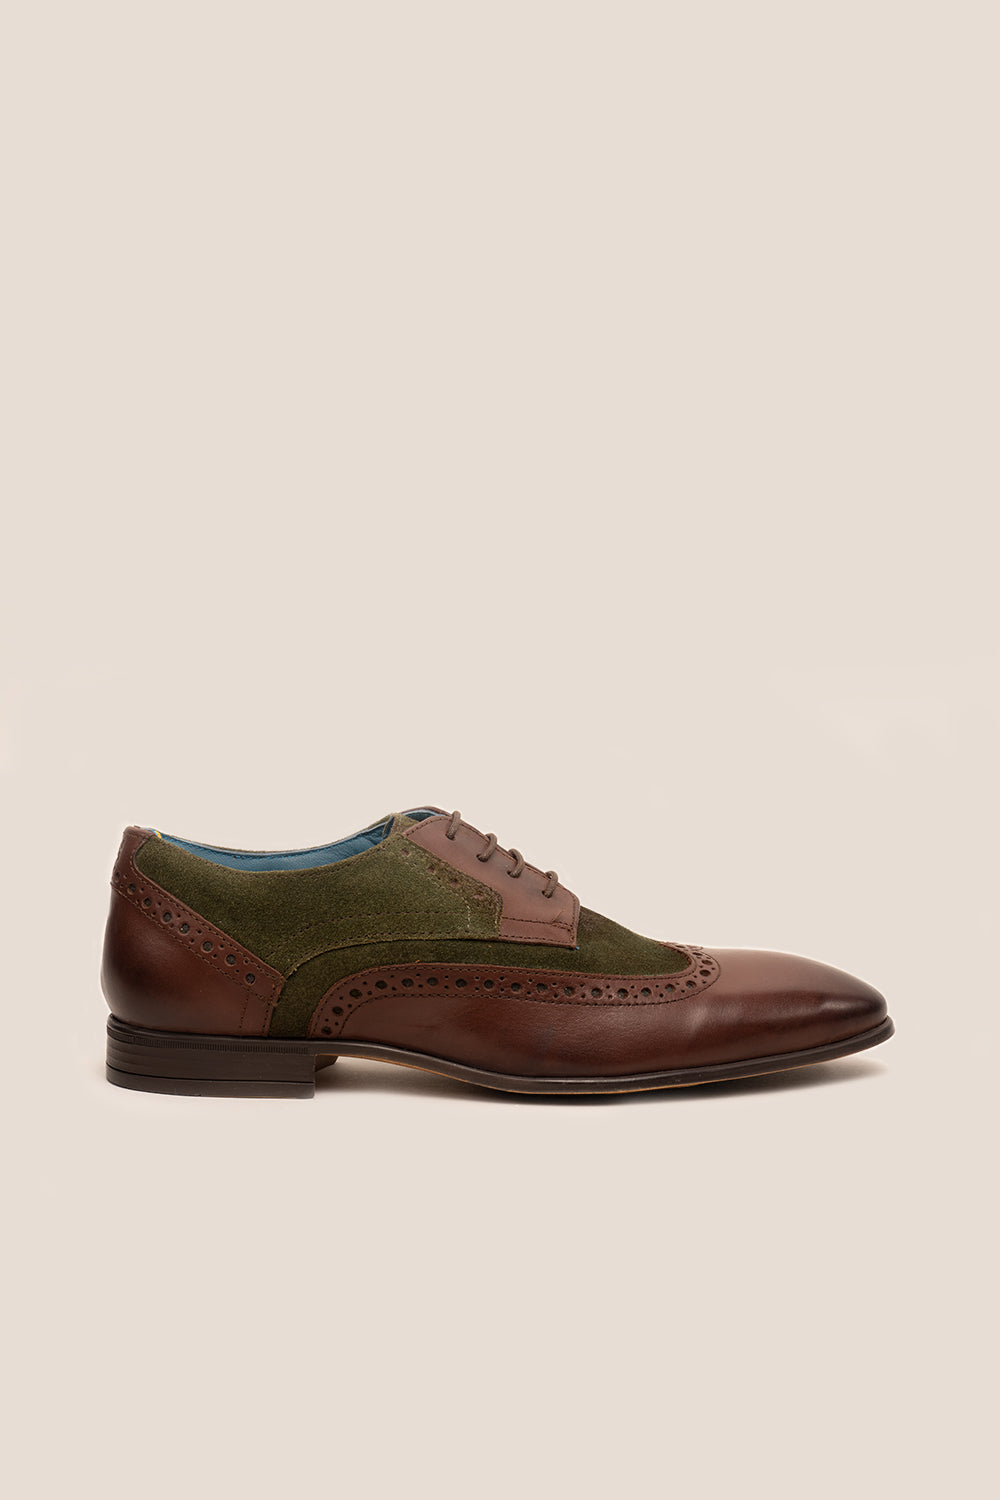 Miles Brown Green Leather/Suede Brogue Shoes Oswin Hyde